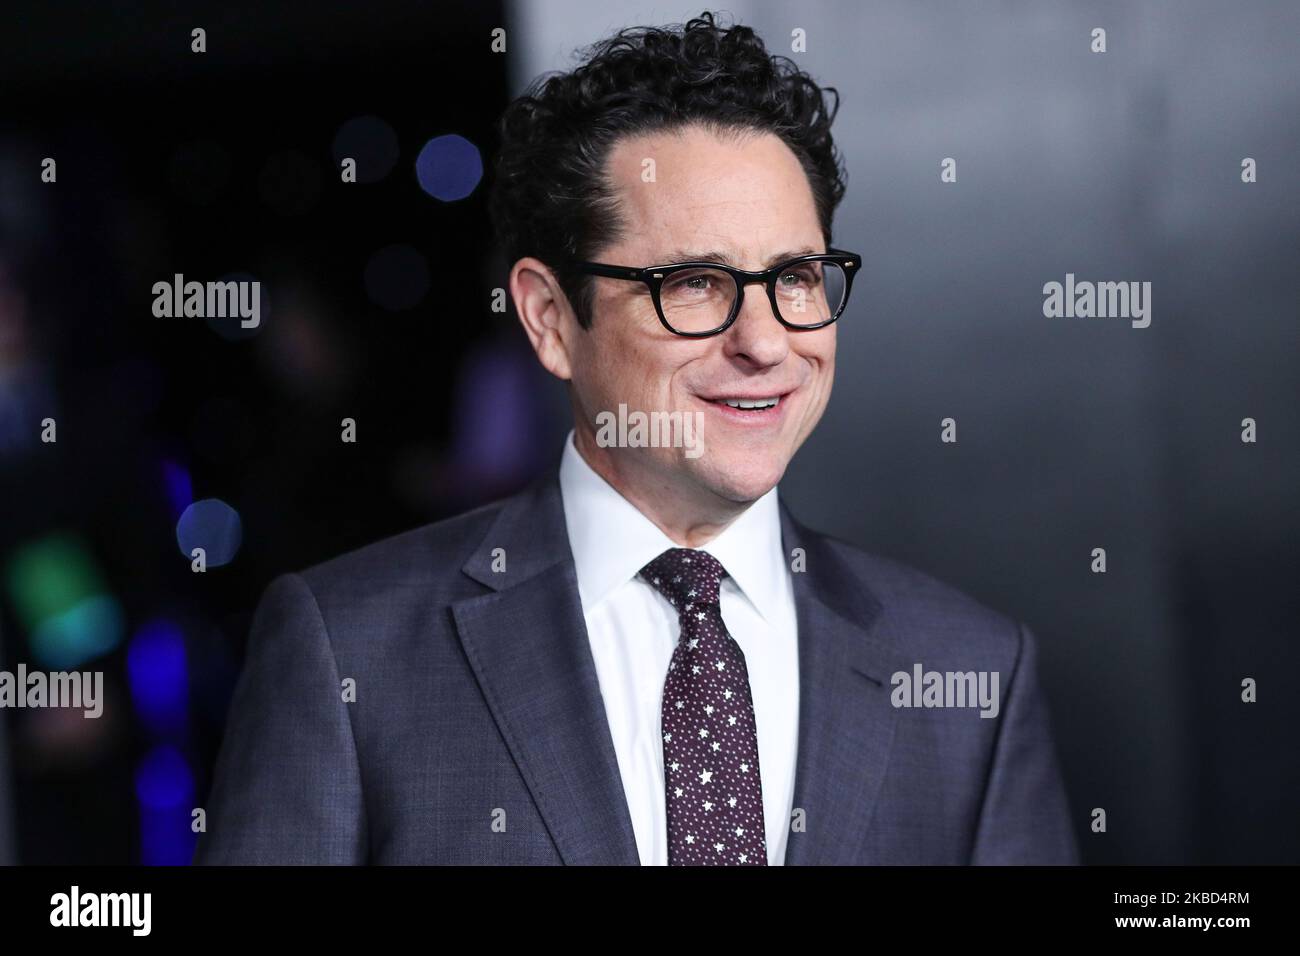 HOLLYWOOD, LOS ANGELES, CALIFORNIA, USA - DECEMBER 16: Director J.J. Abrams arrives at the World Premiere Of Disney's 'Star Wars: The Rise Of Skywalker' held at the El Capitan Theatre on December 16, 2019 in Hollywood, Los Angeles, California, United States. (Photo by Xavier Collin/Image Press Agency/NurPhoto) Stock Photo